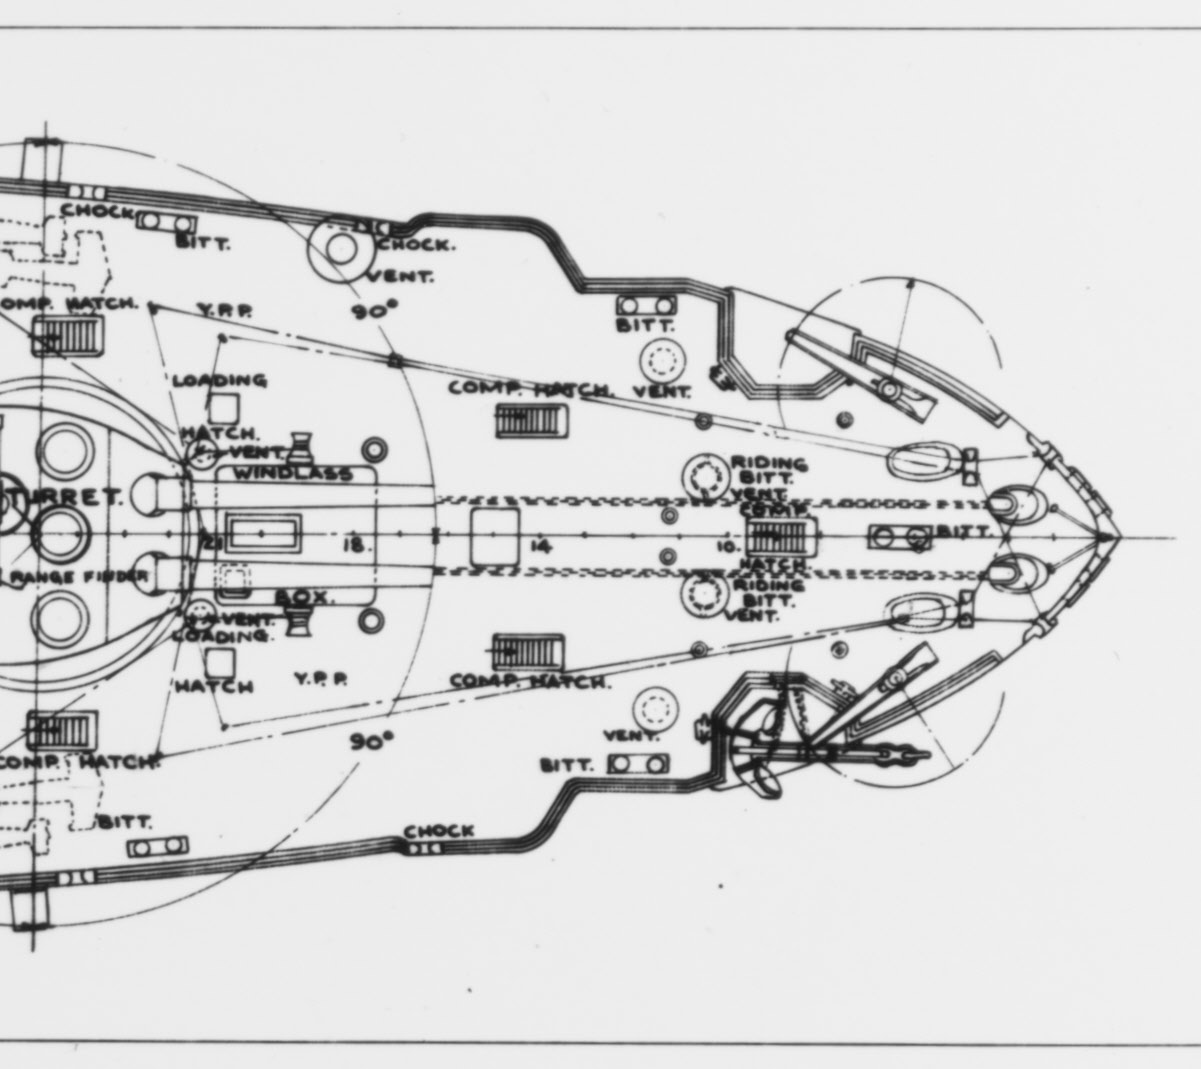 Plan of rear section of upper deck, USS Ohio (BB-12)